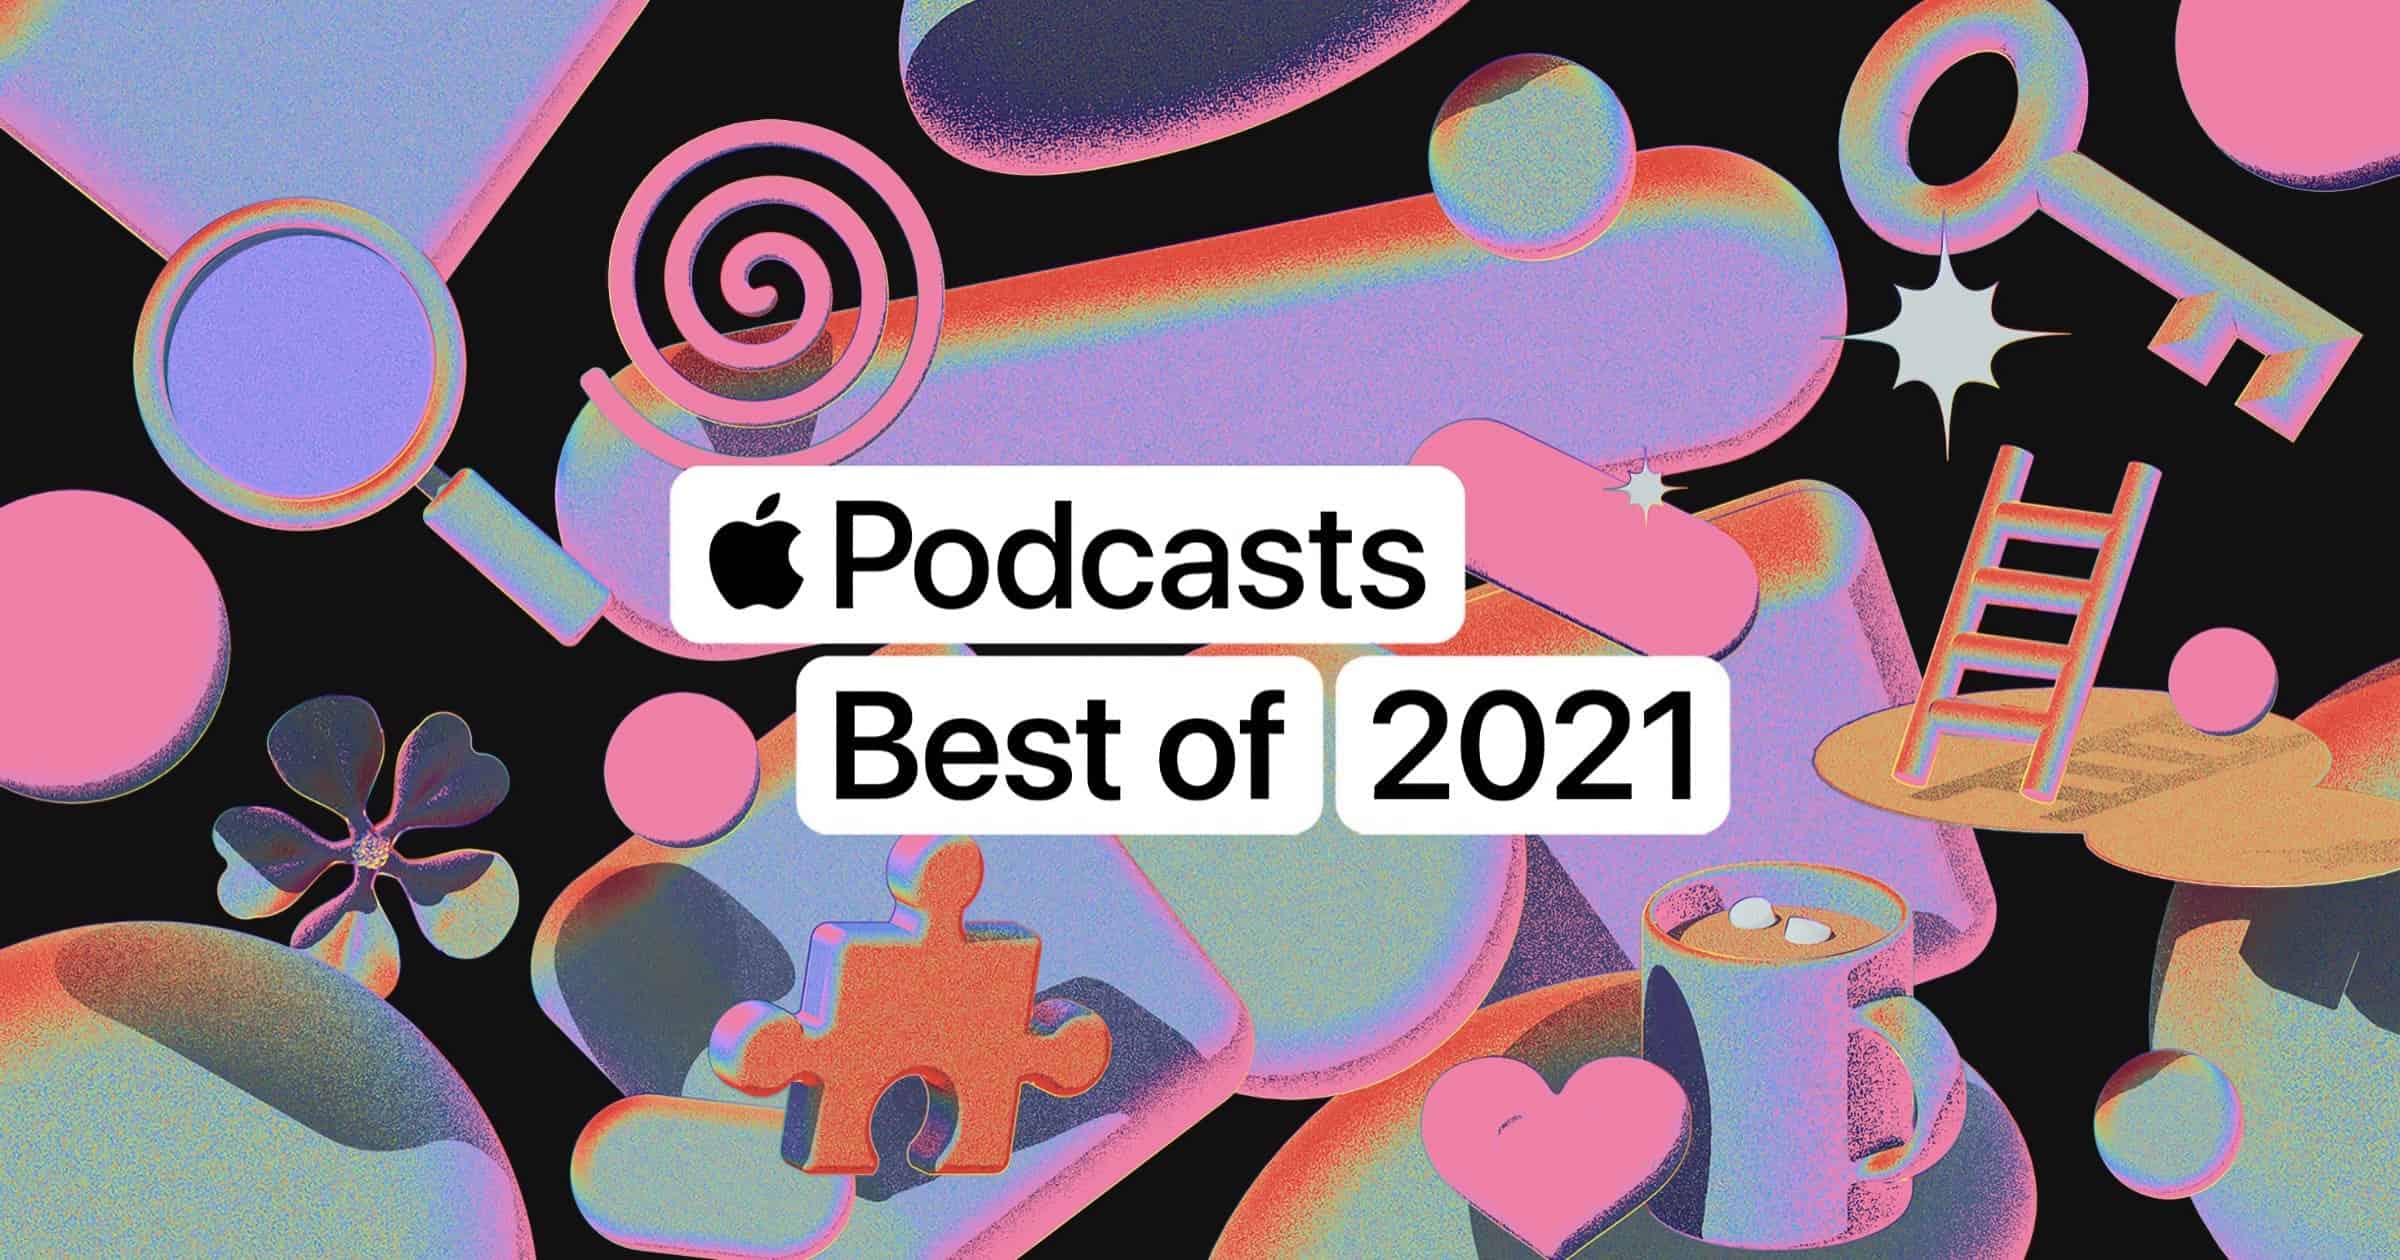 Apple Podcasts Best of 2021 Includes ‘A Slight Change of Plans’